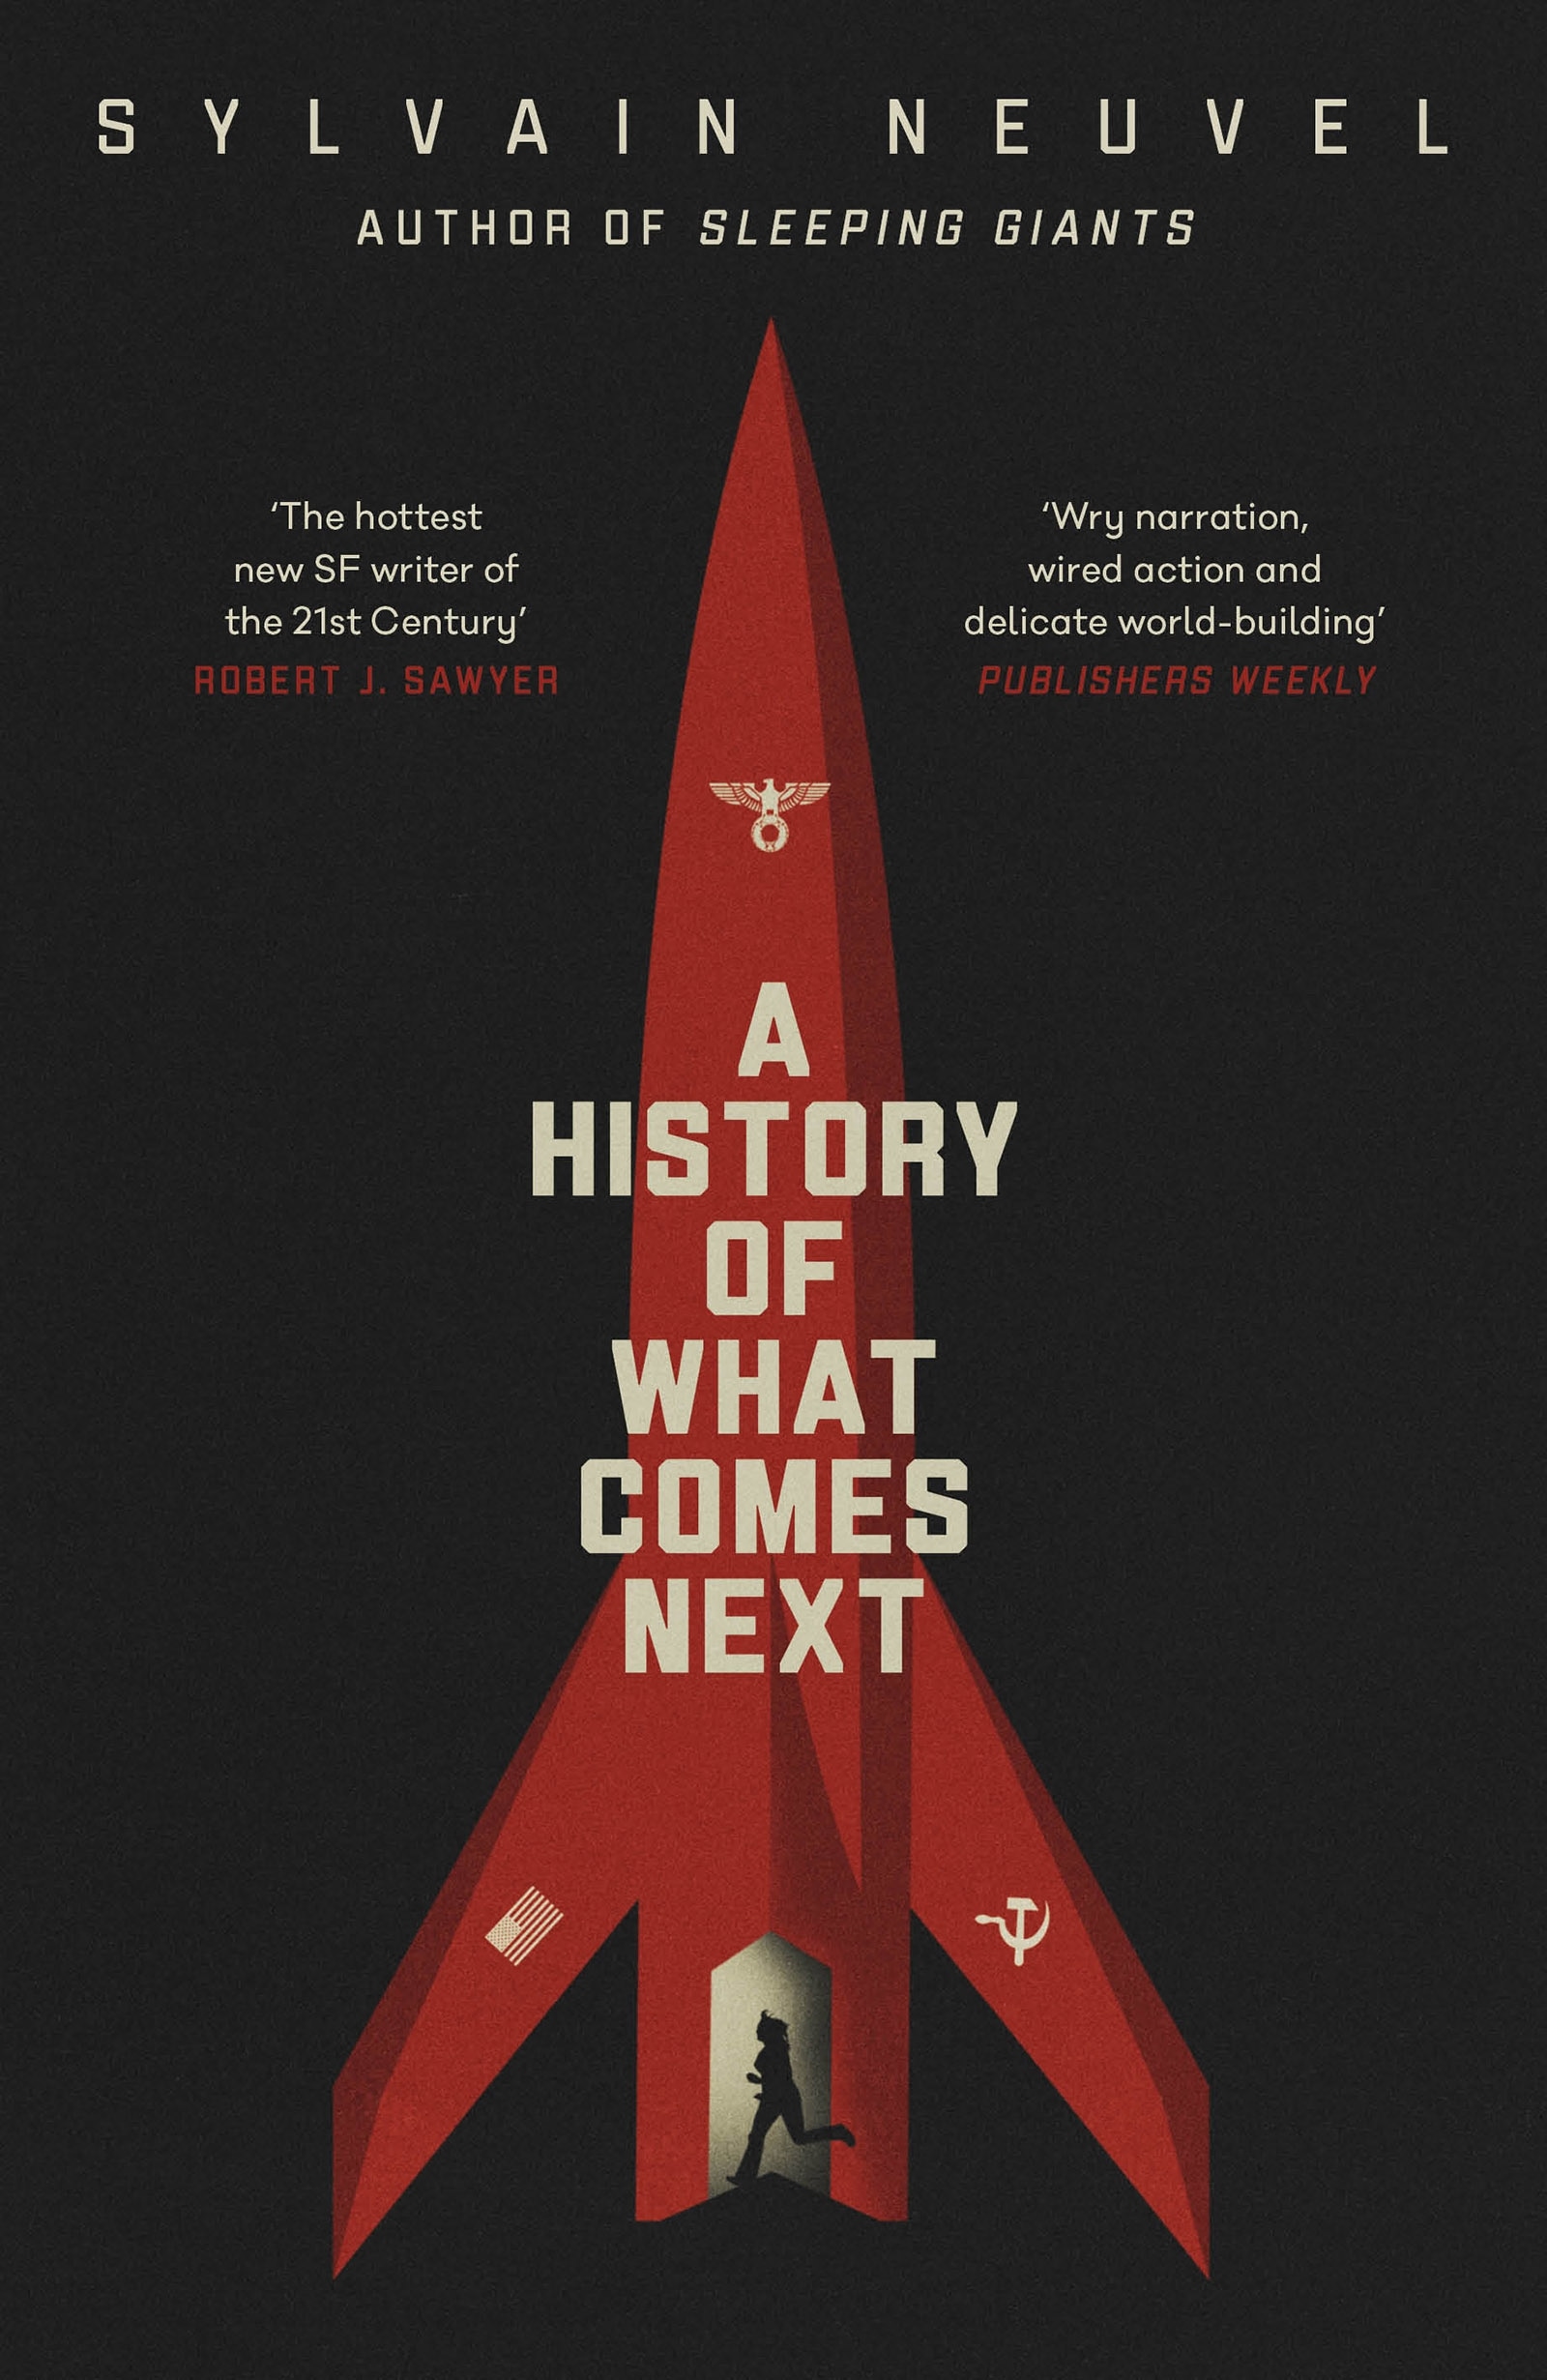 Book “A History of What Comes Next” by Sylvain Neuvel — March 4, 2021